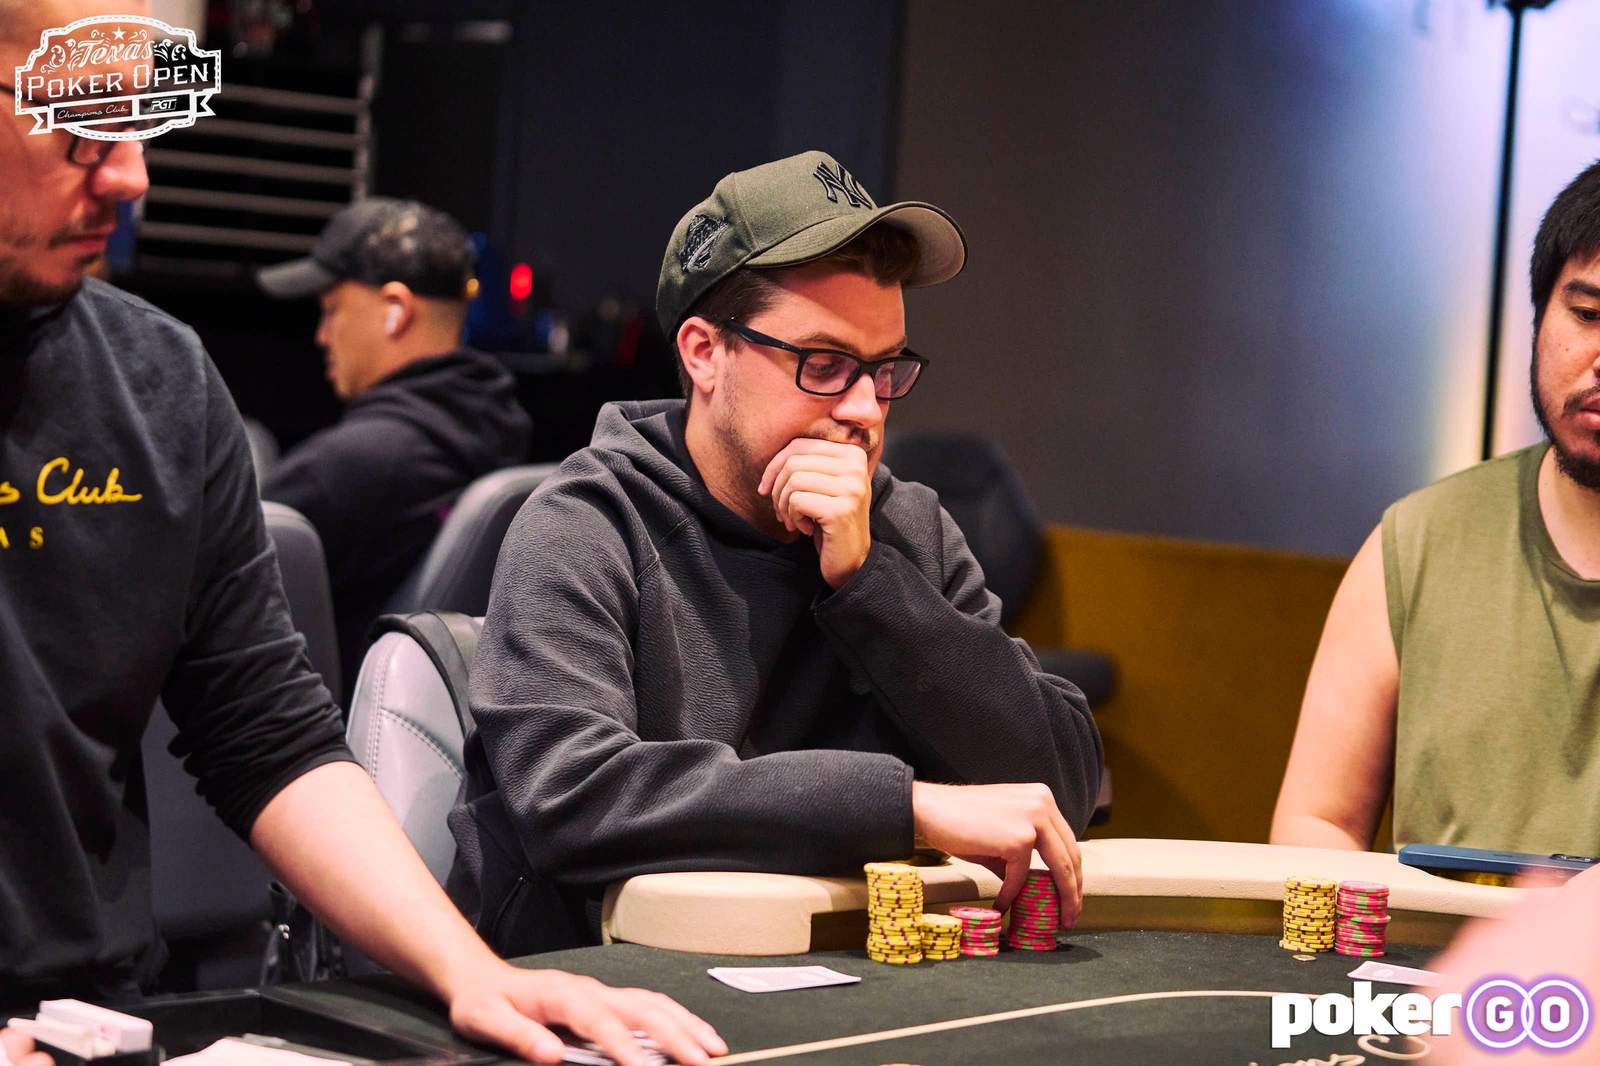 Frederic Normand Leads Texas Poker Open High Roller #5 Final Table